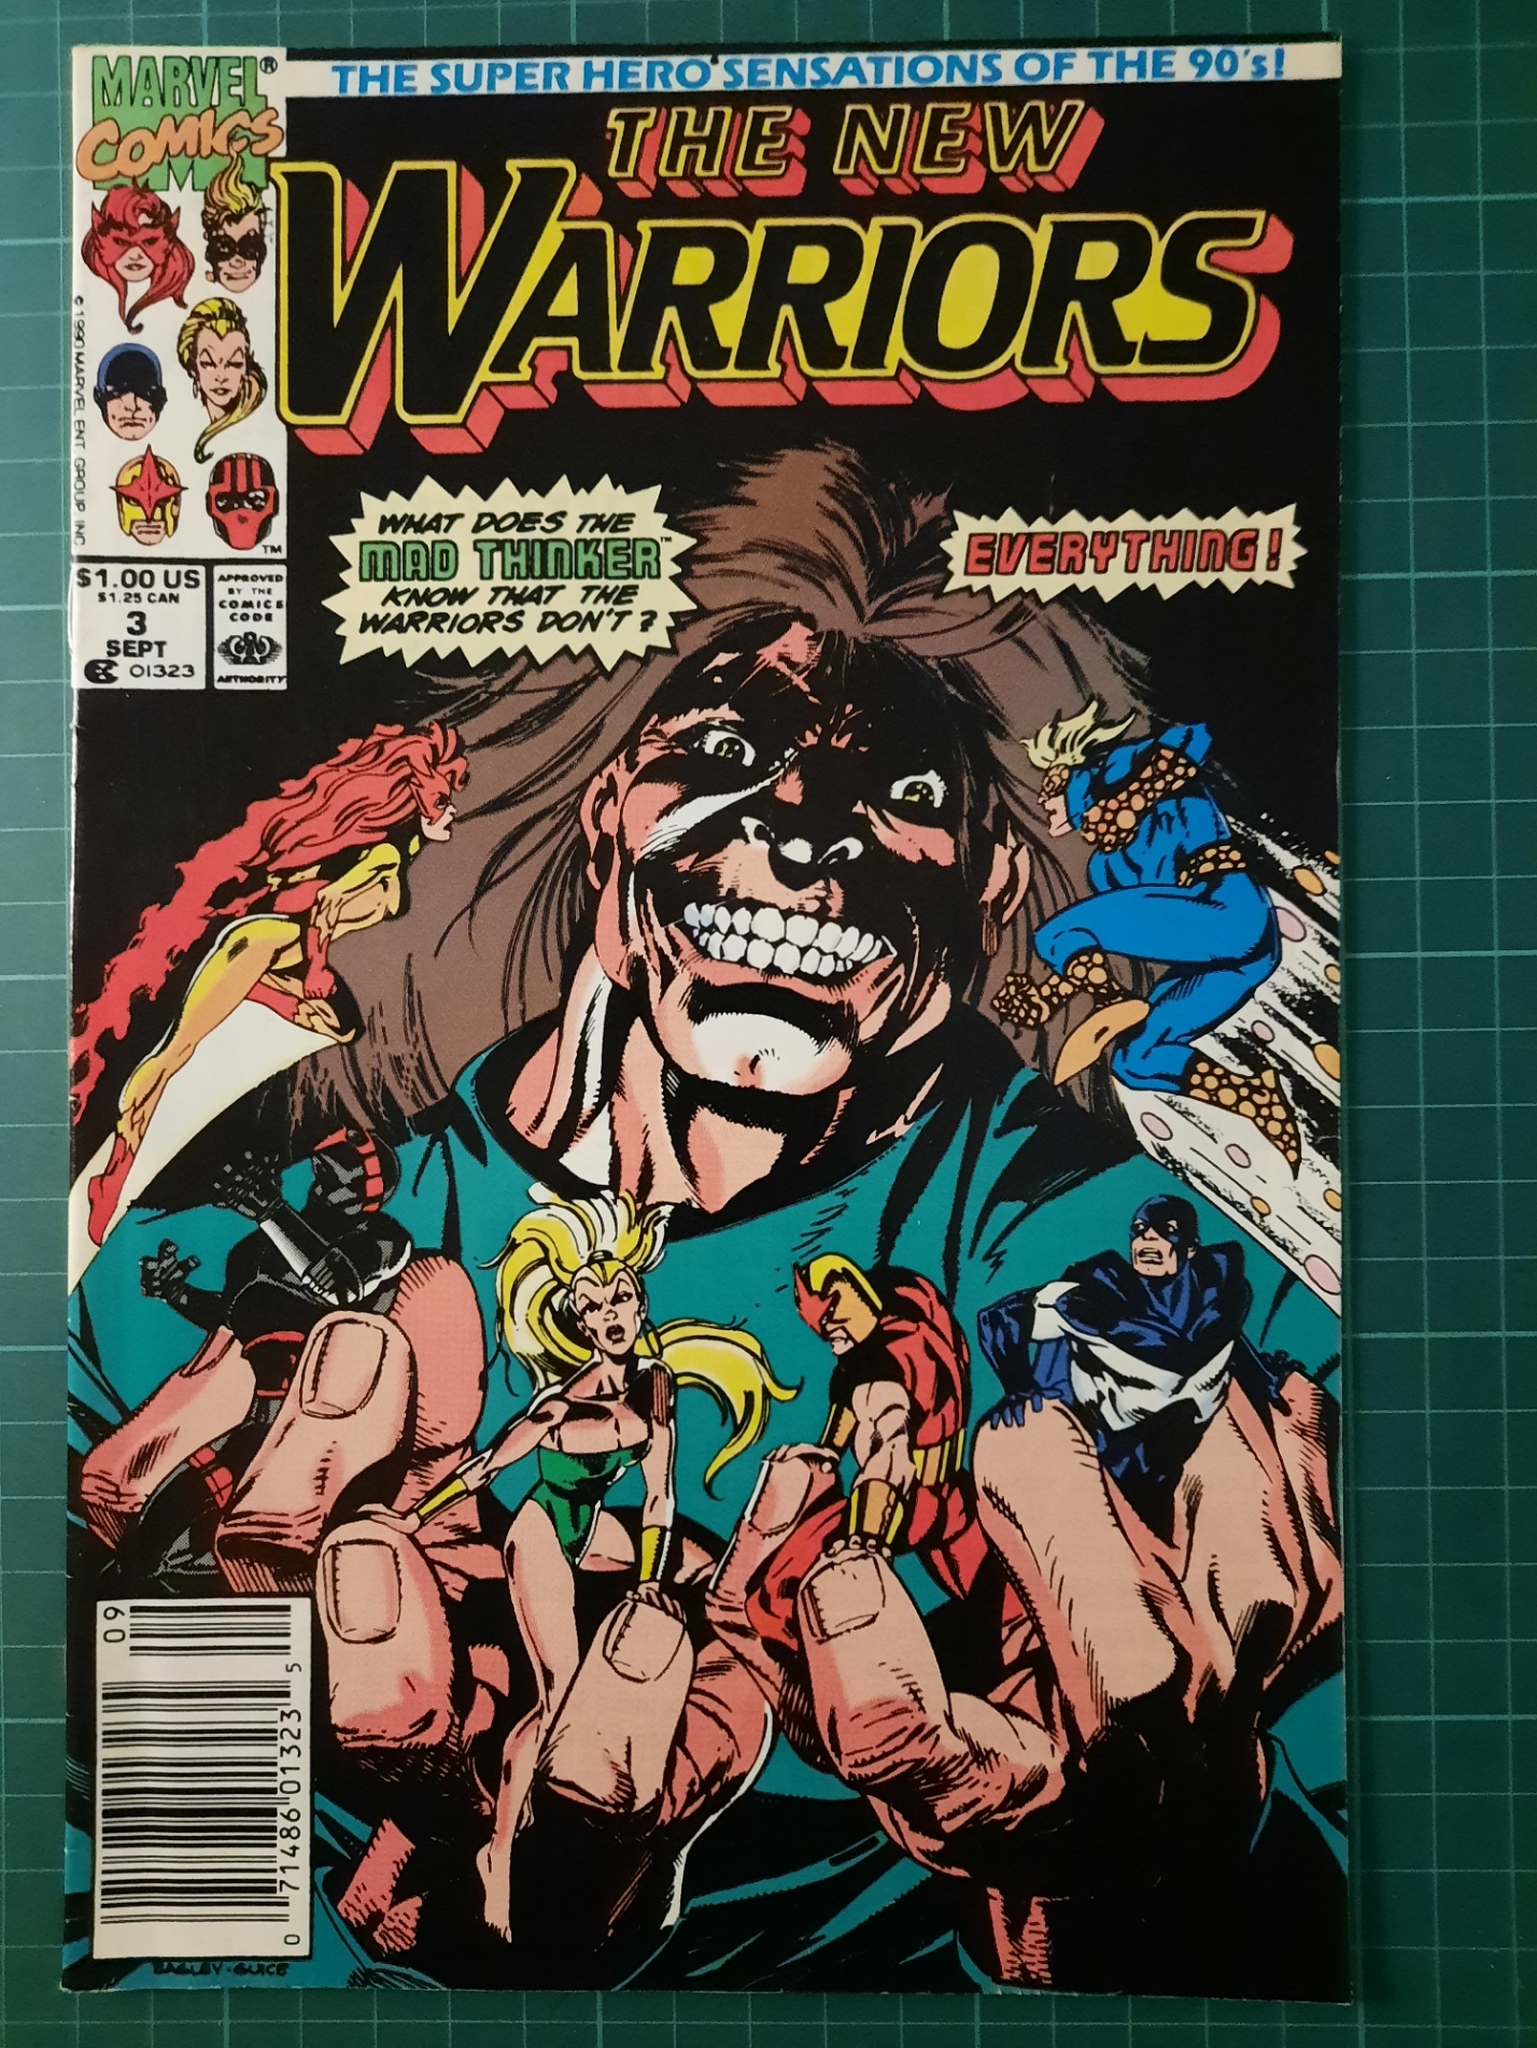 The new Warriors #03